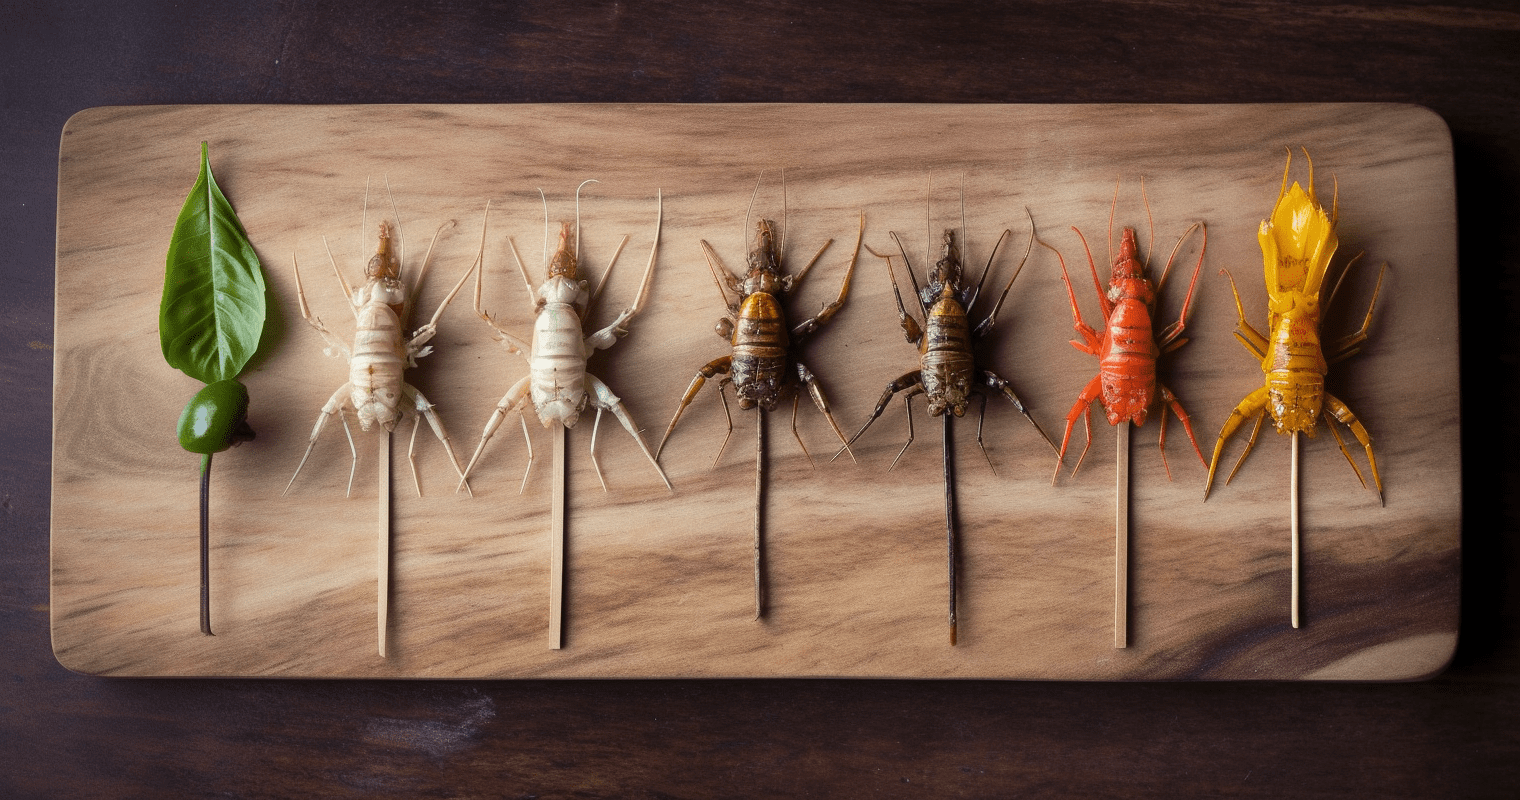 Thai Crickets on a Stick - Final Result